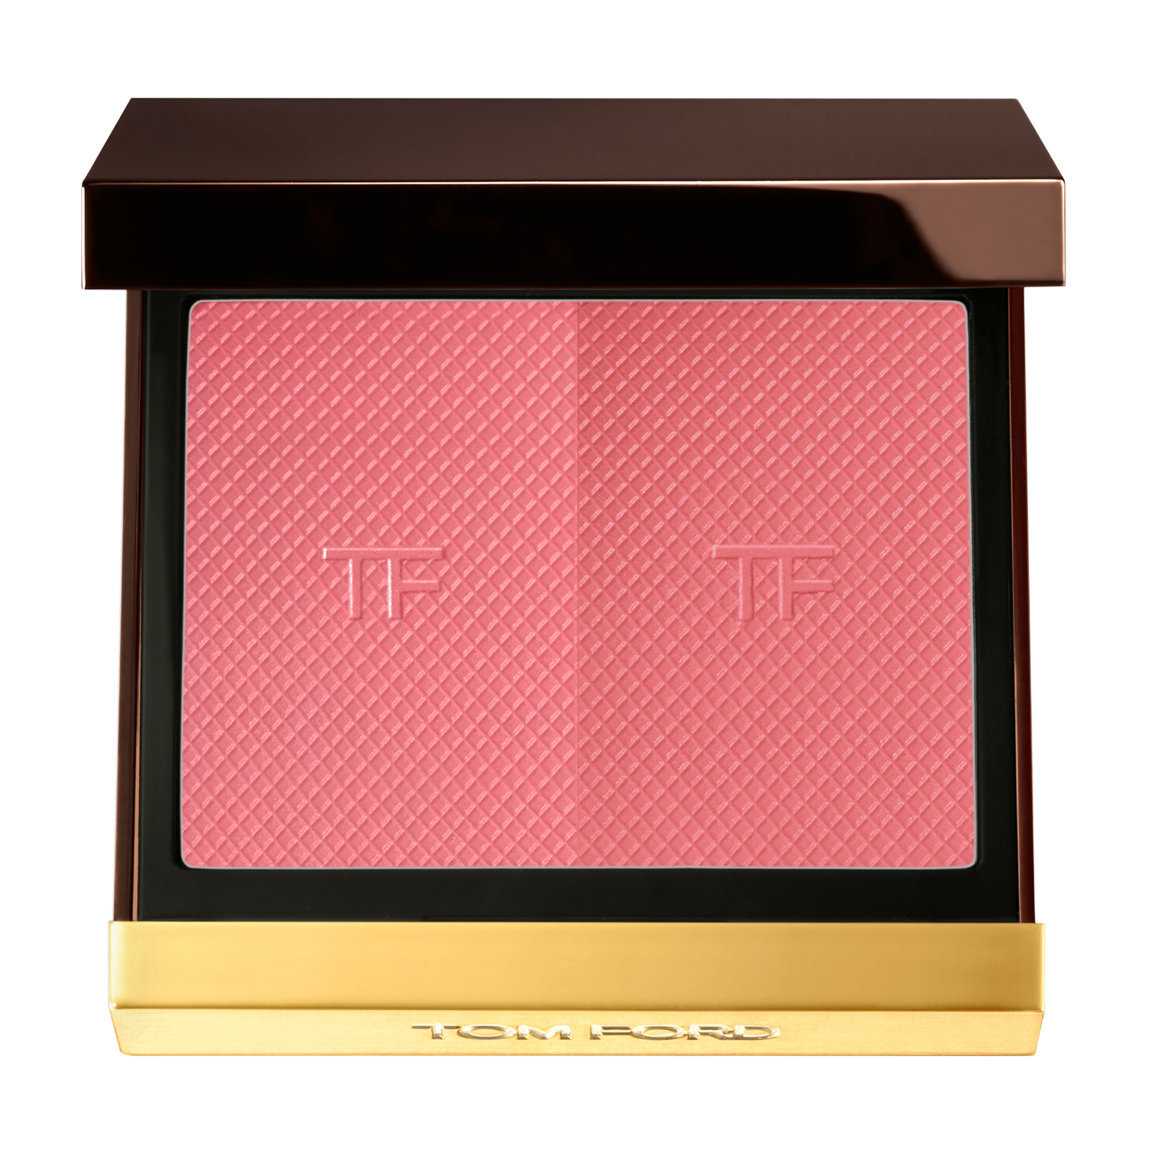 TOM FORD Shade & Illuminate Blush Aflame alternative view 1 - product swatch.